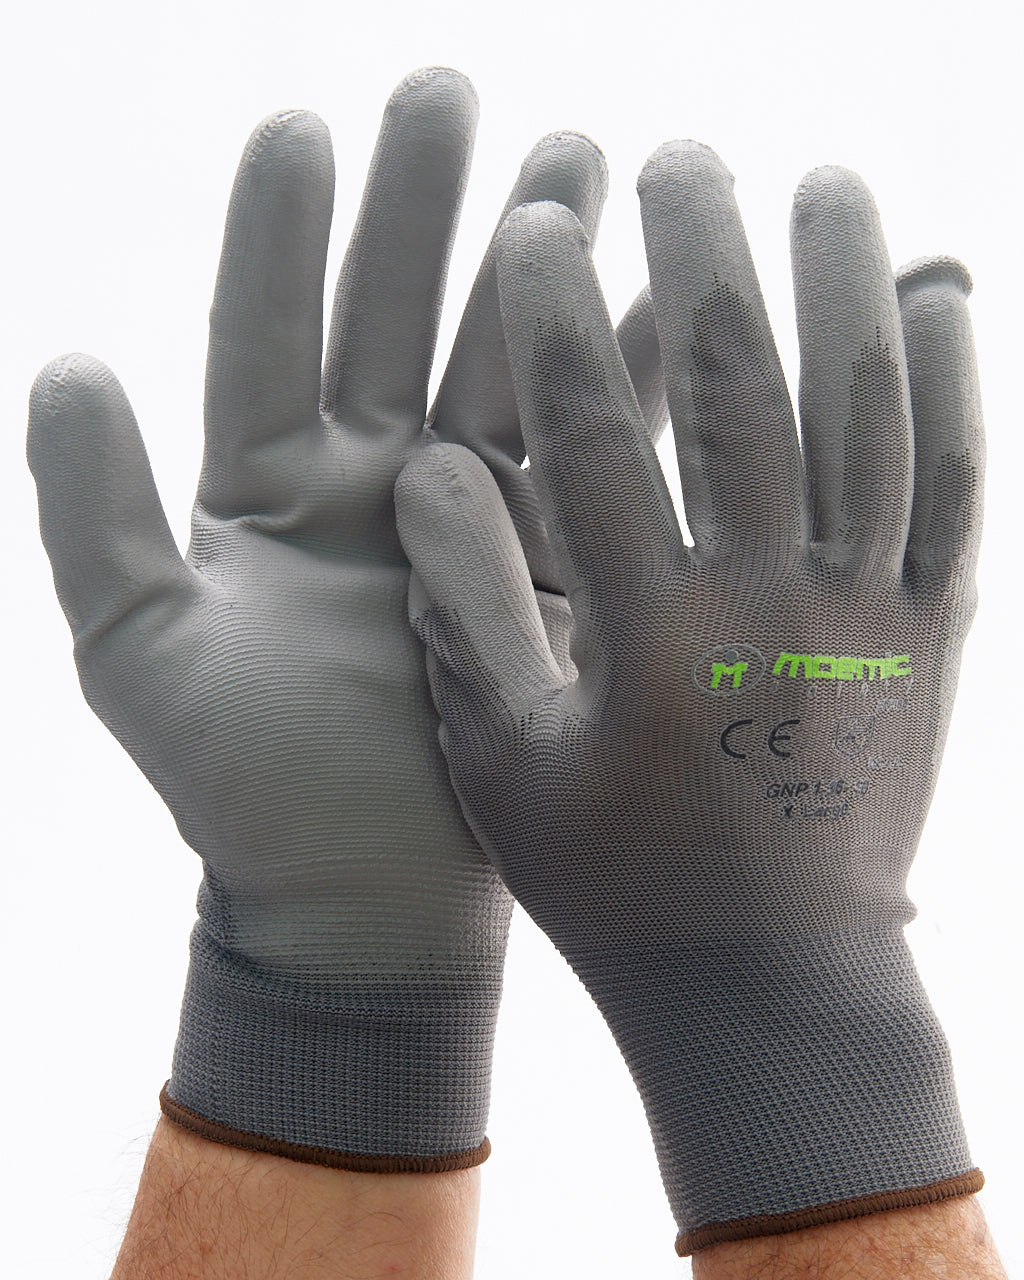 Moemic Liteflex PU Coated Nylon Glove 6pk - Gloves - Best Buy Trade Supplies Direct to Trade